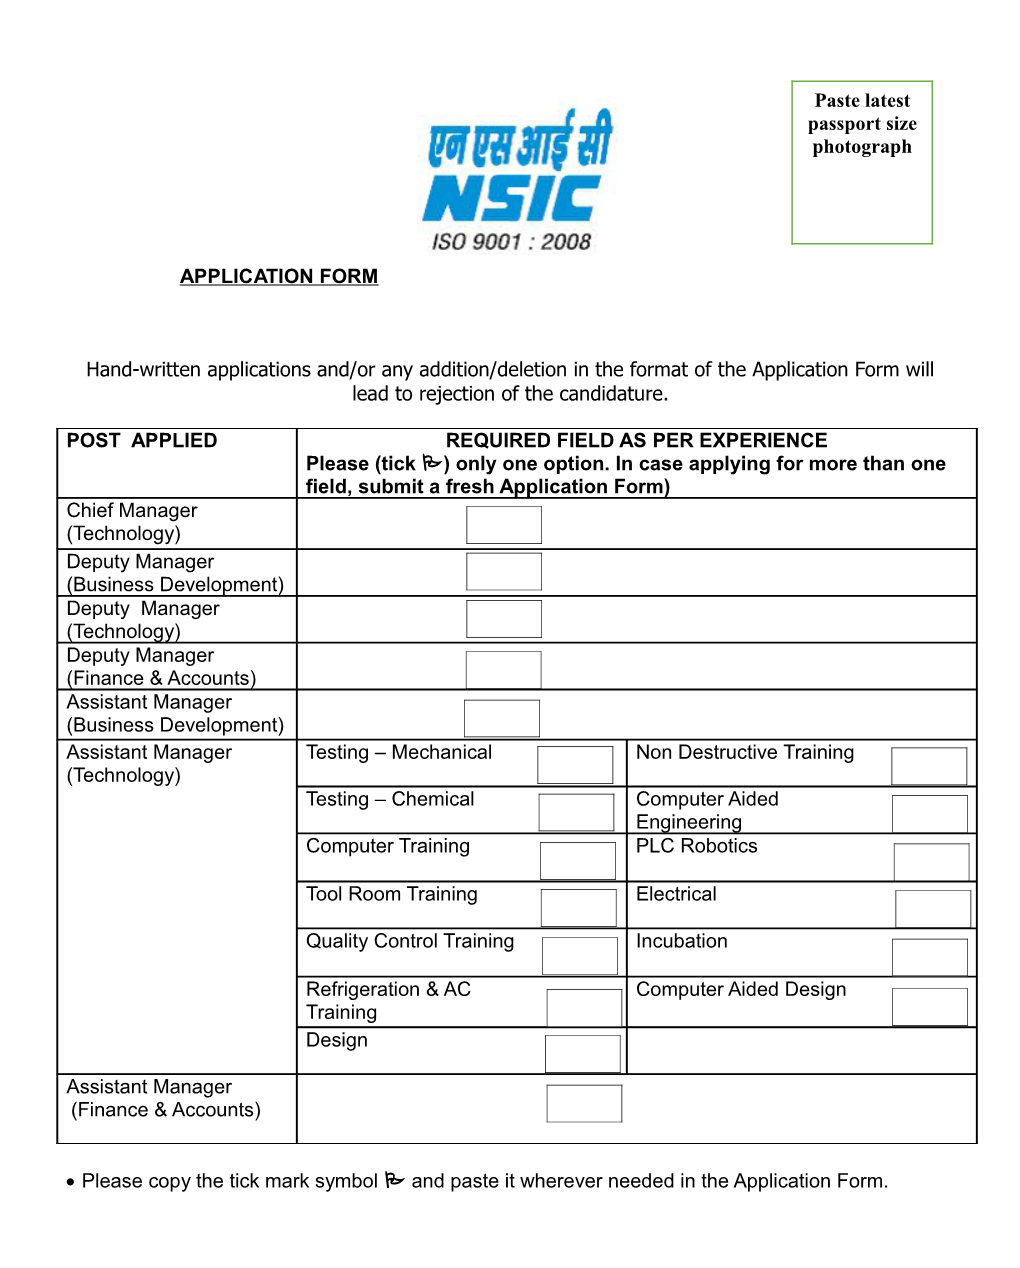 Application Form s7